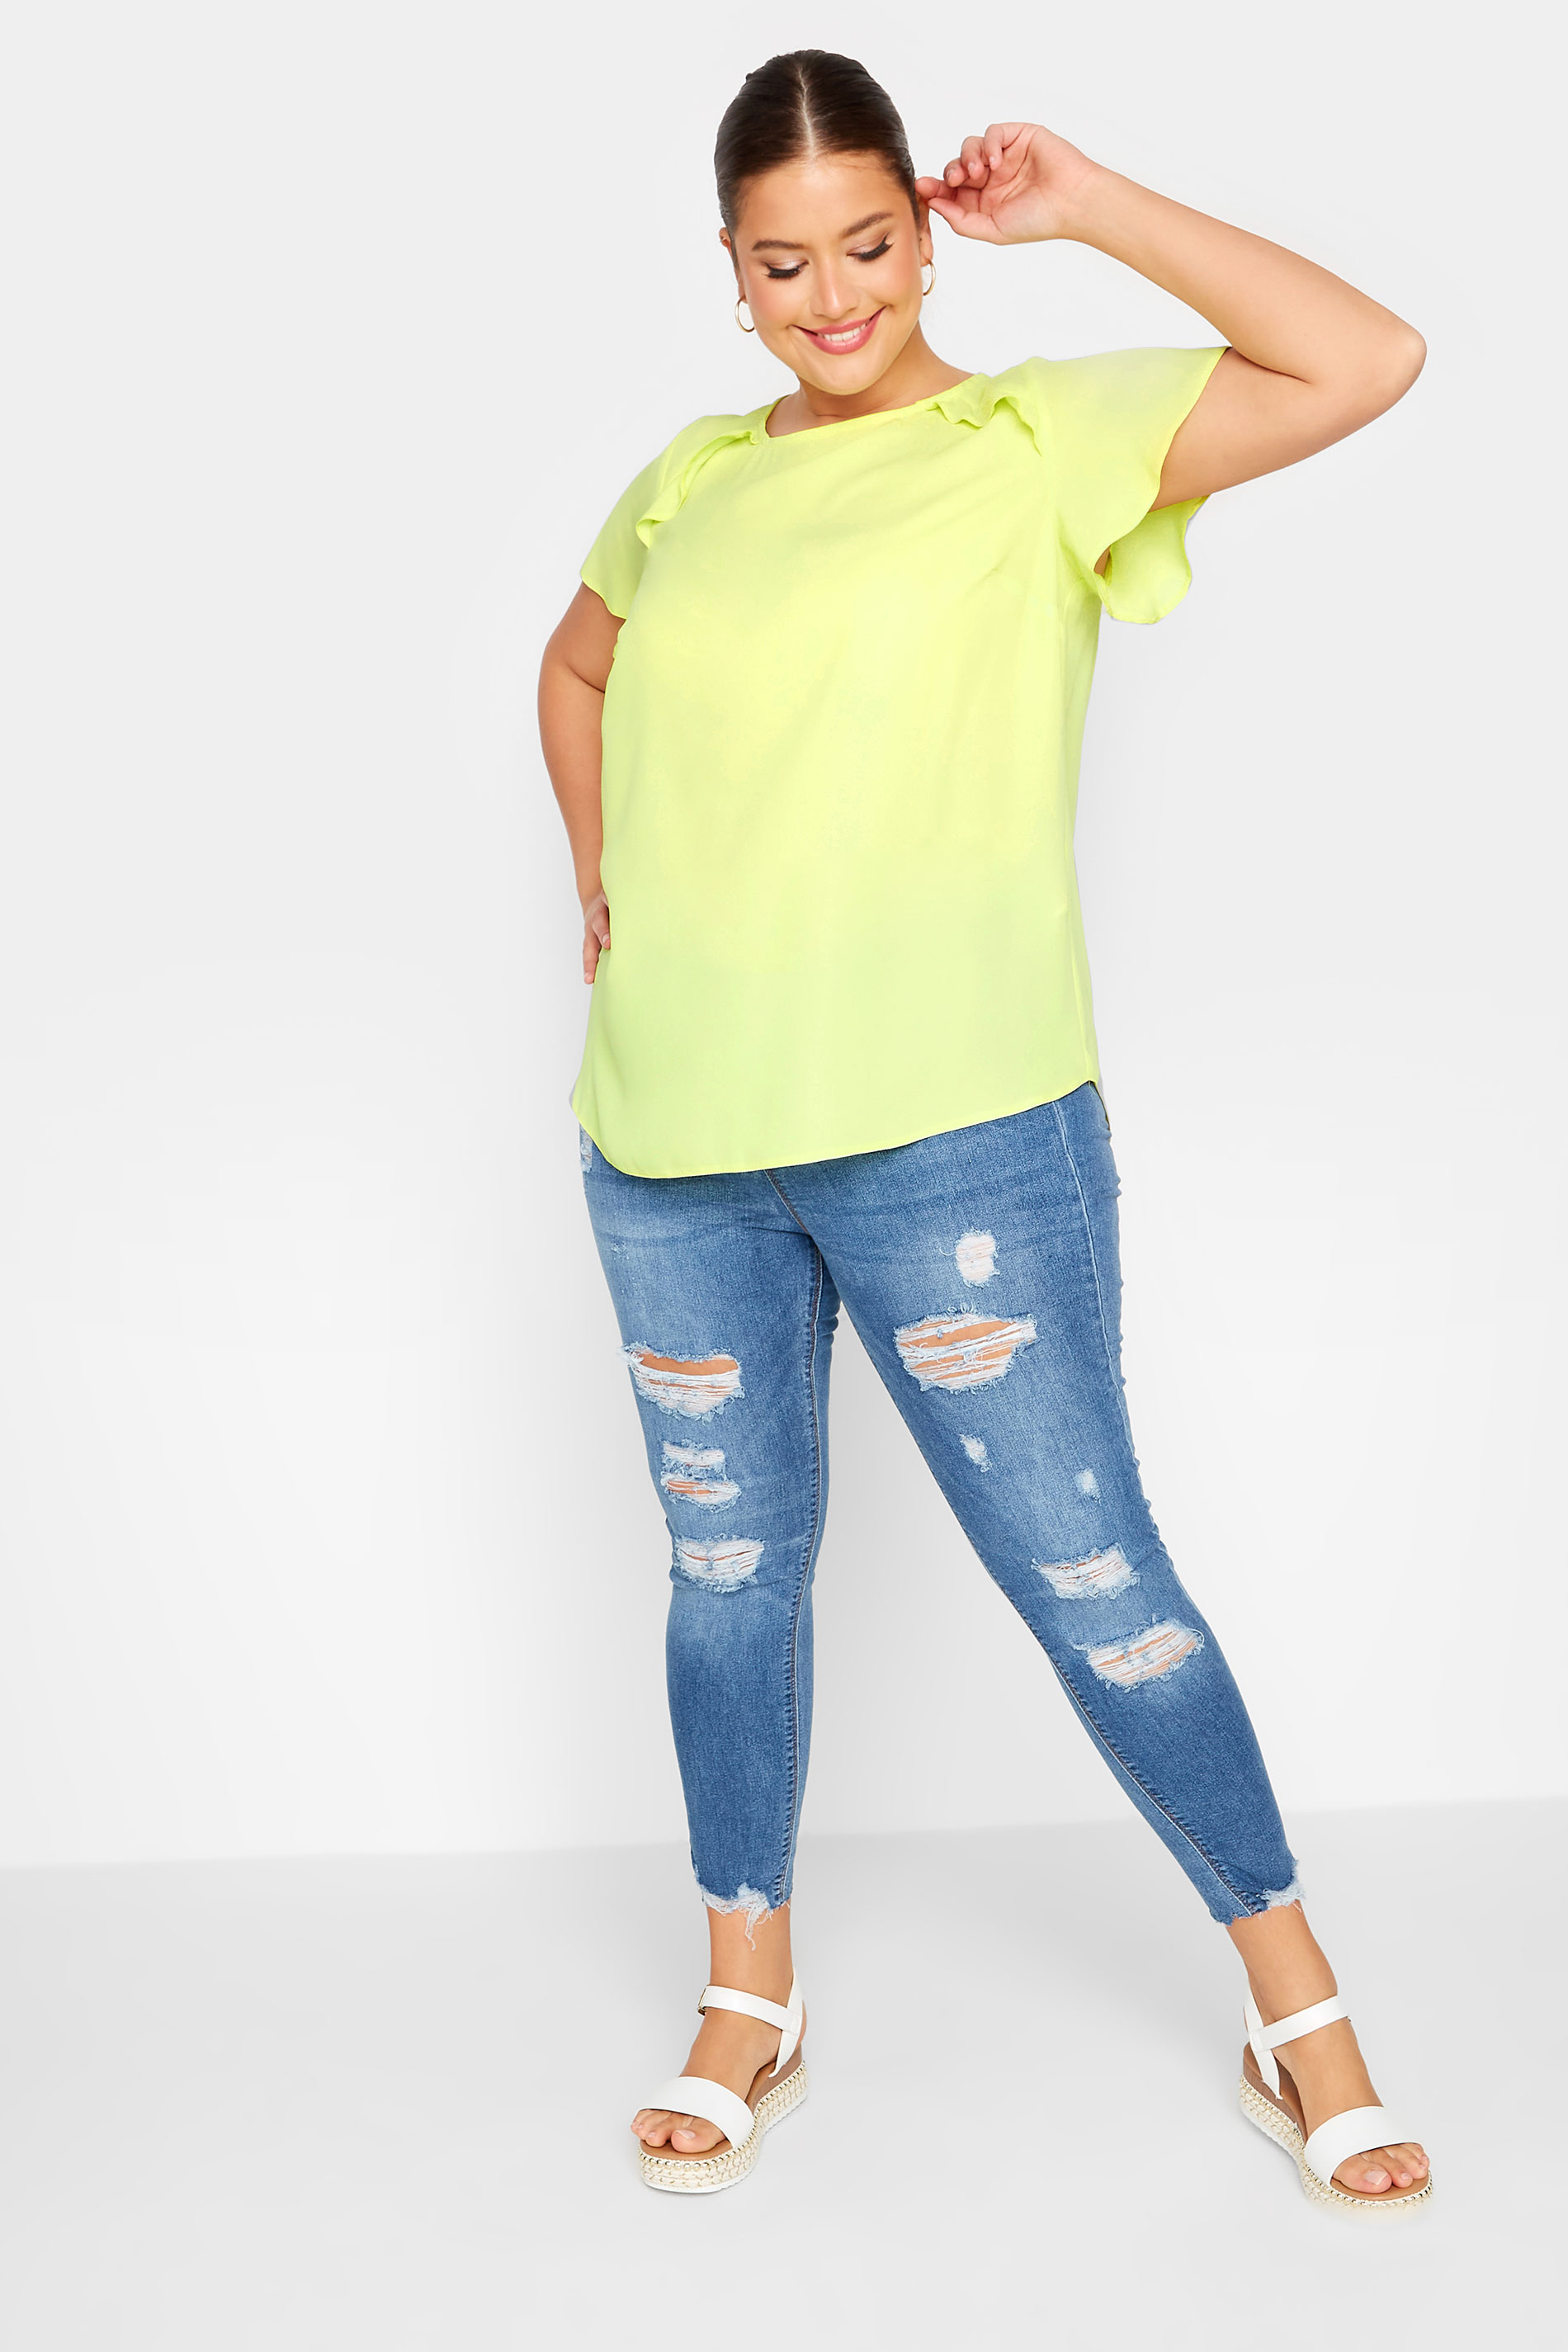 https://cdn.yoursclothing.com/Images/ProductImages/8dbbb71c-8657-45_174273_B.jpg